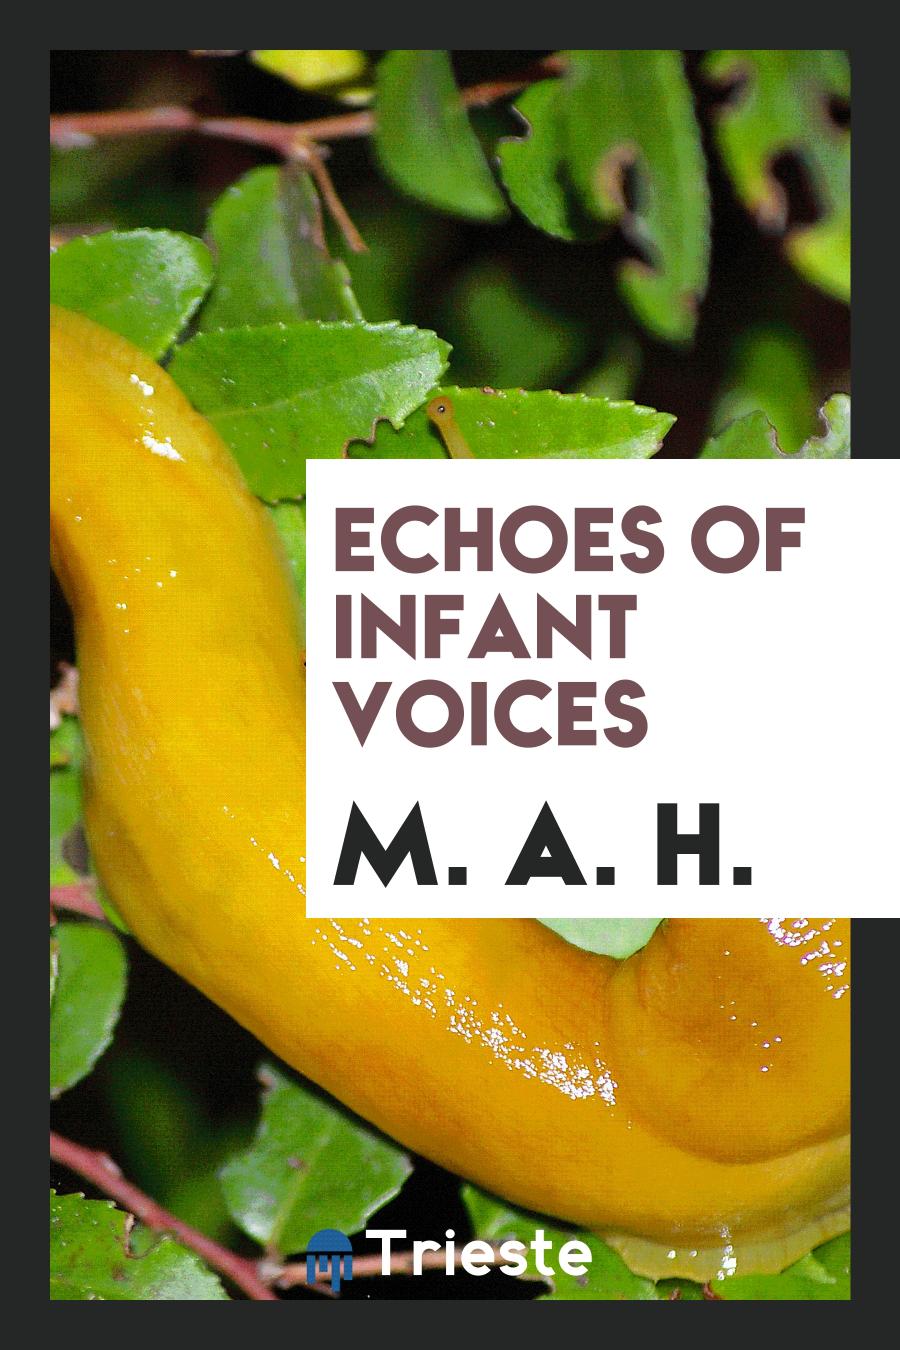 Echoes of Infant Voices